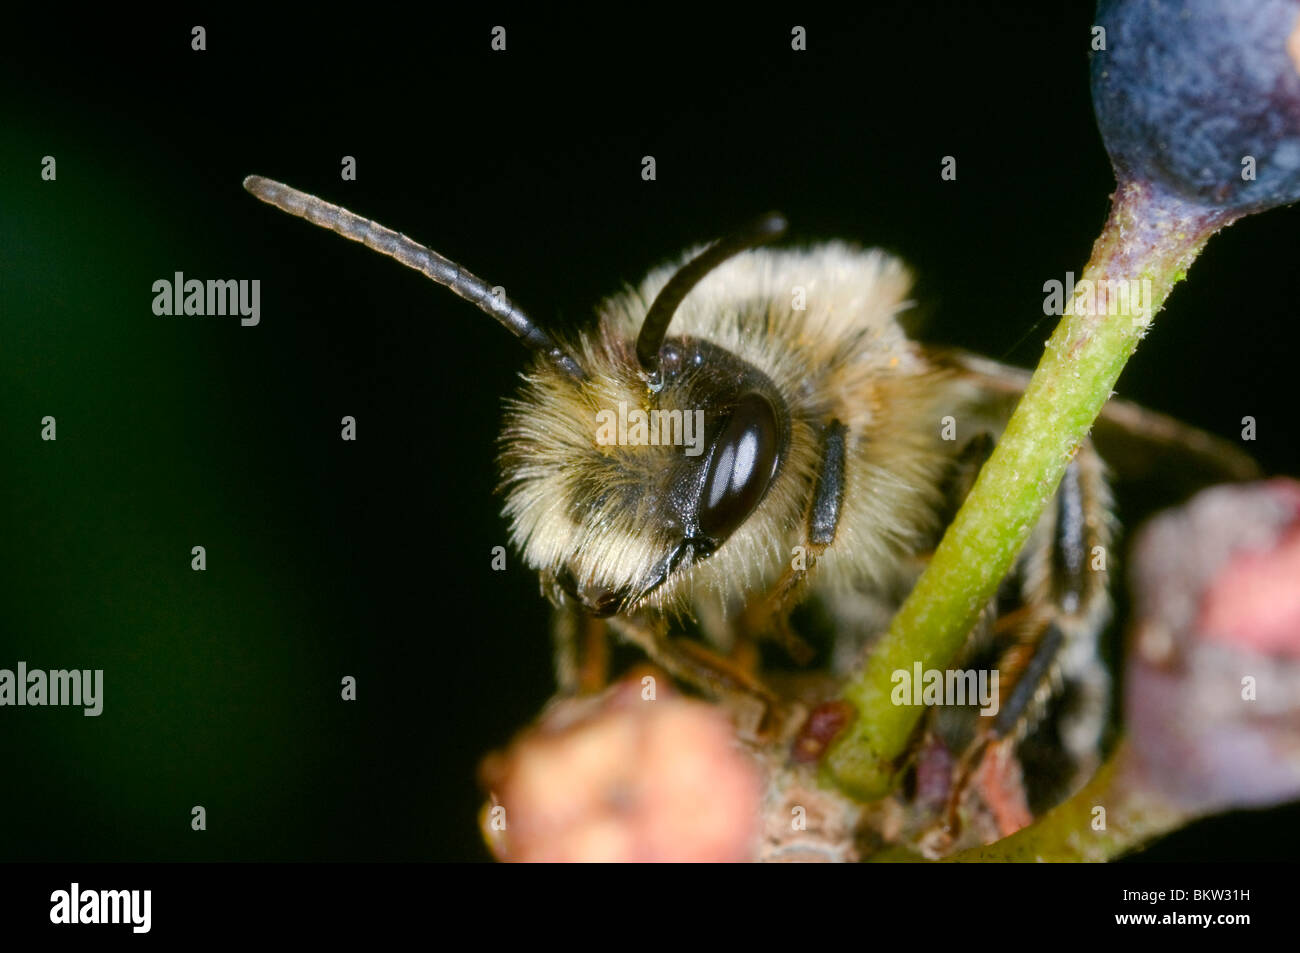 Miner bee, probably Andrena Argentata, at rest on an ivy plant Stock Photo